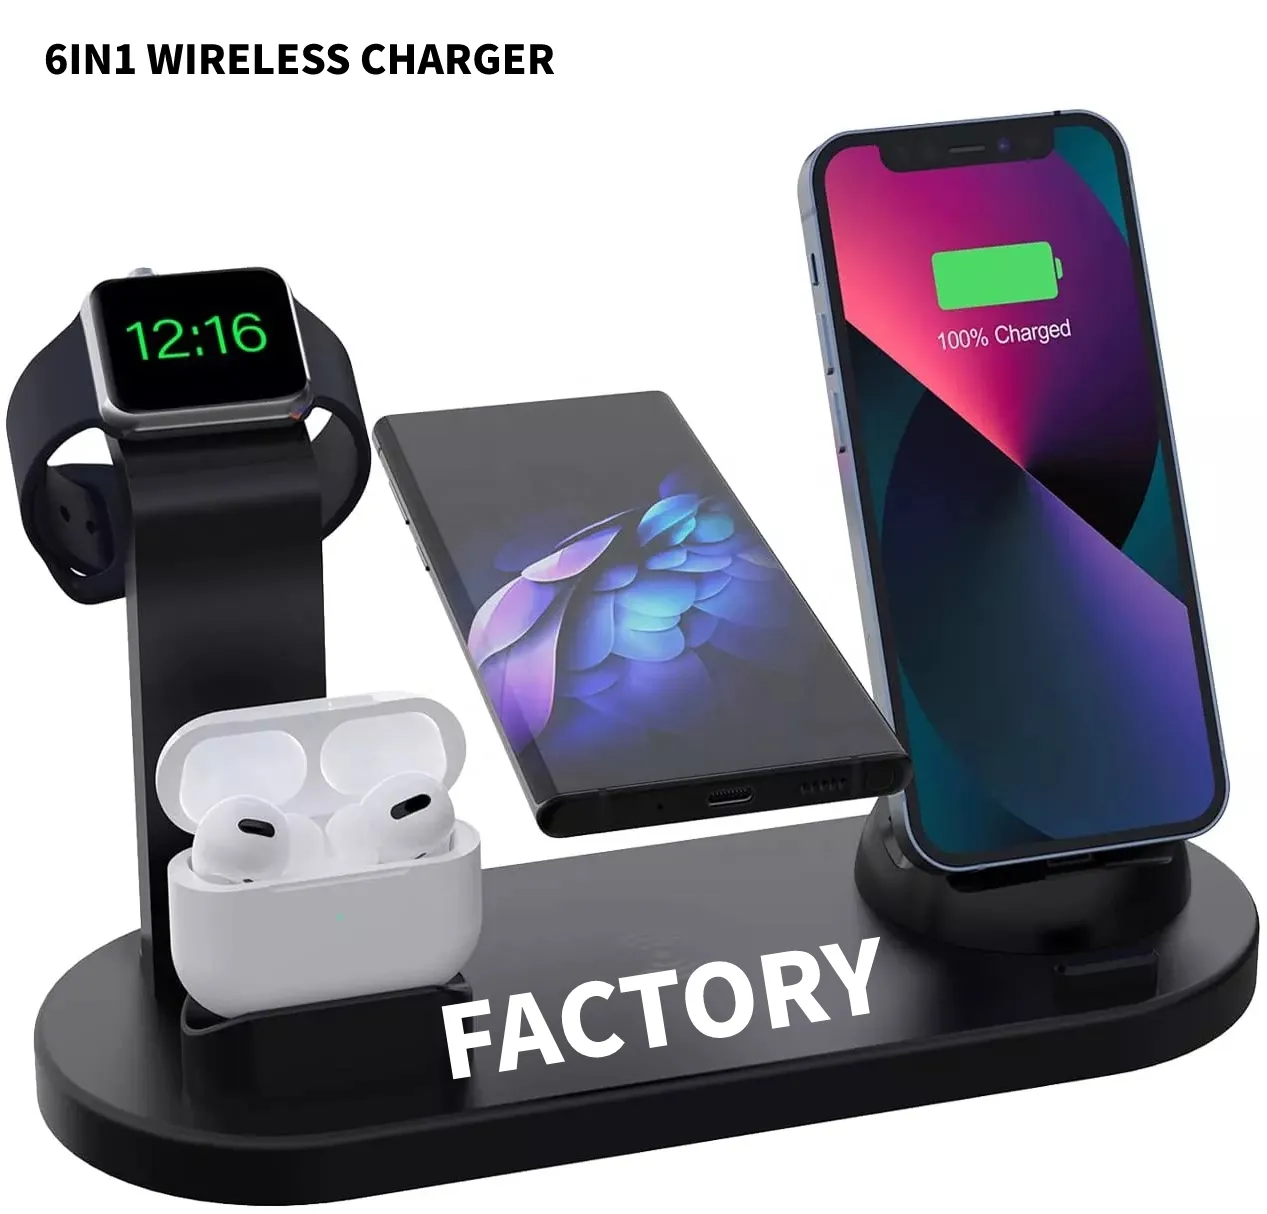 Best Seller Trending Products Fast 3 Qi for AirPods IWatch Phone 6in1 Wireless Charger Mobile Phone Accessories